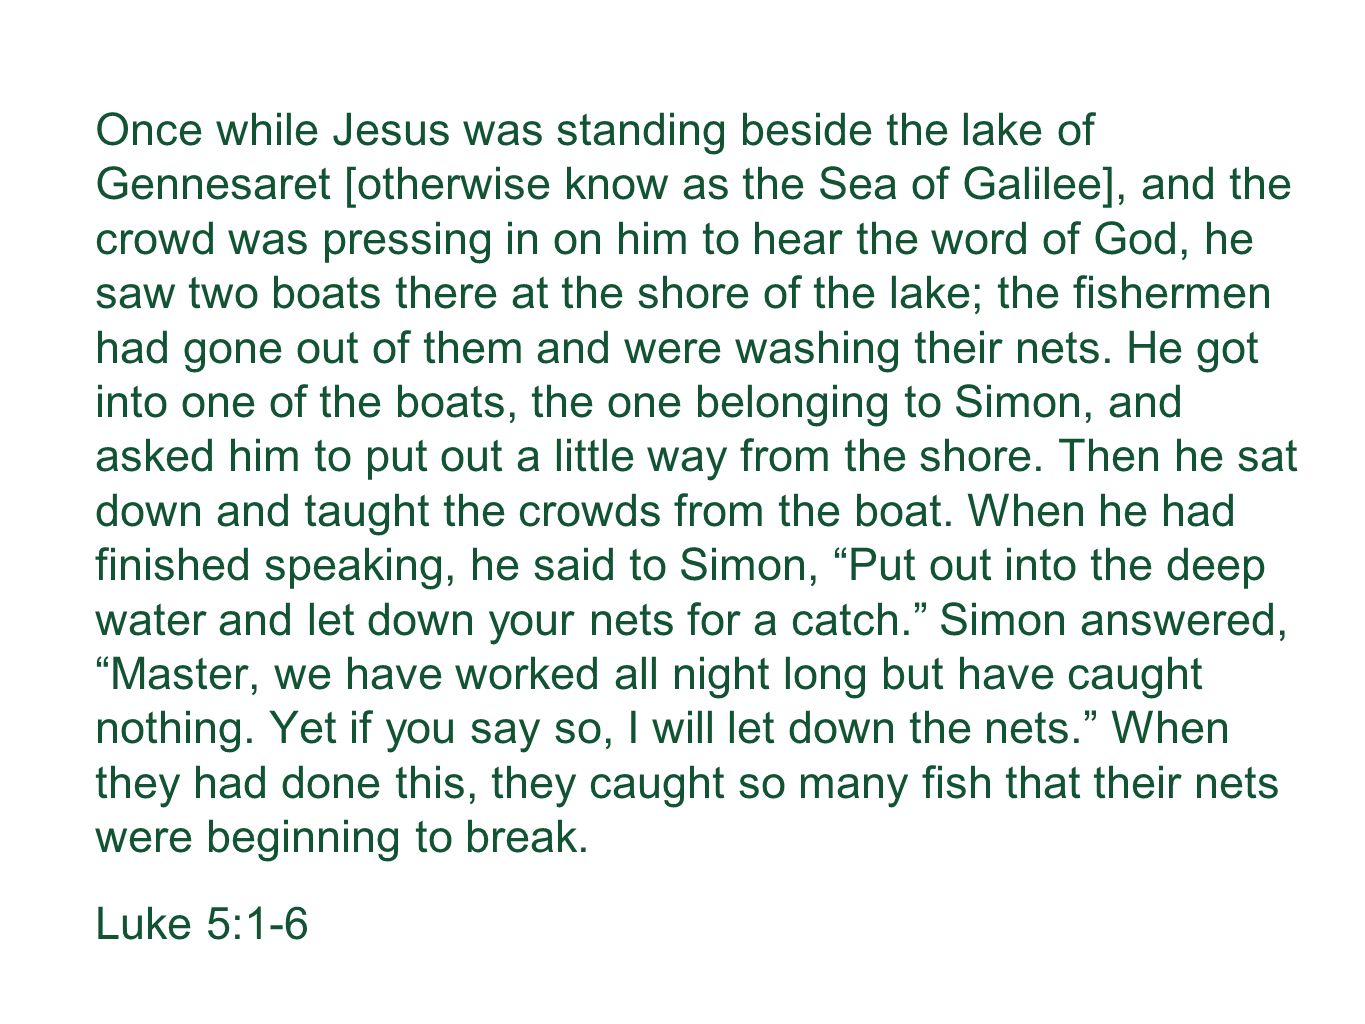 Once while Jesus was standing beside the lake of Gennesaret [otherwise know as the Sea of Galilee], and the crowd was pressing in on him to hear the word of God, he saw two boats there at the shore of the lake; the fishermen had gone out of them and were washing their nets.